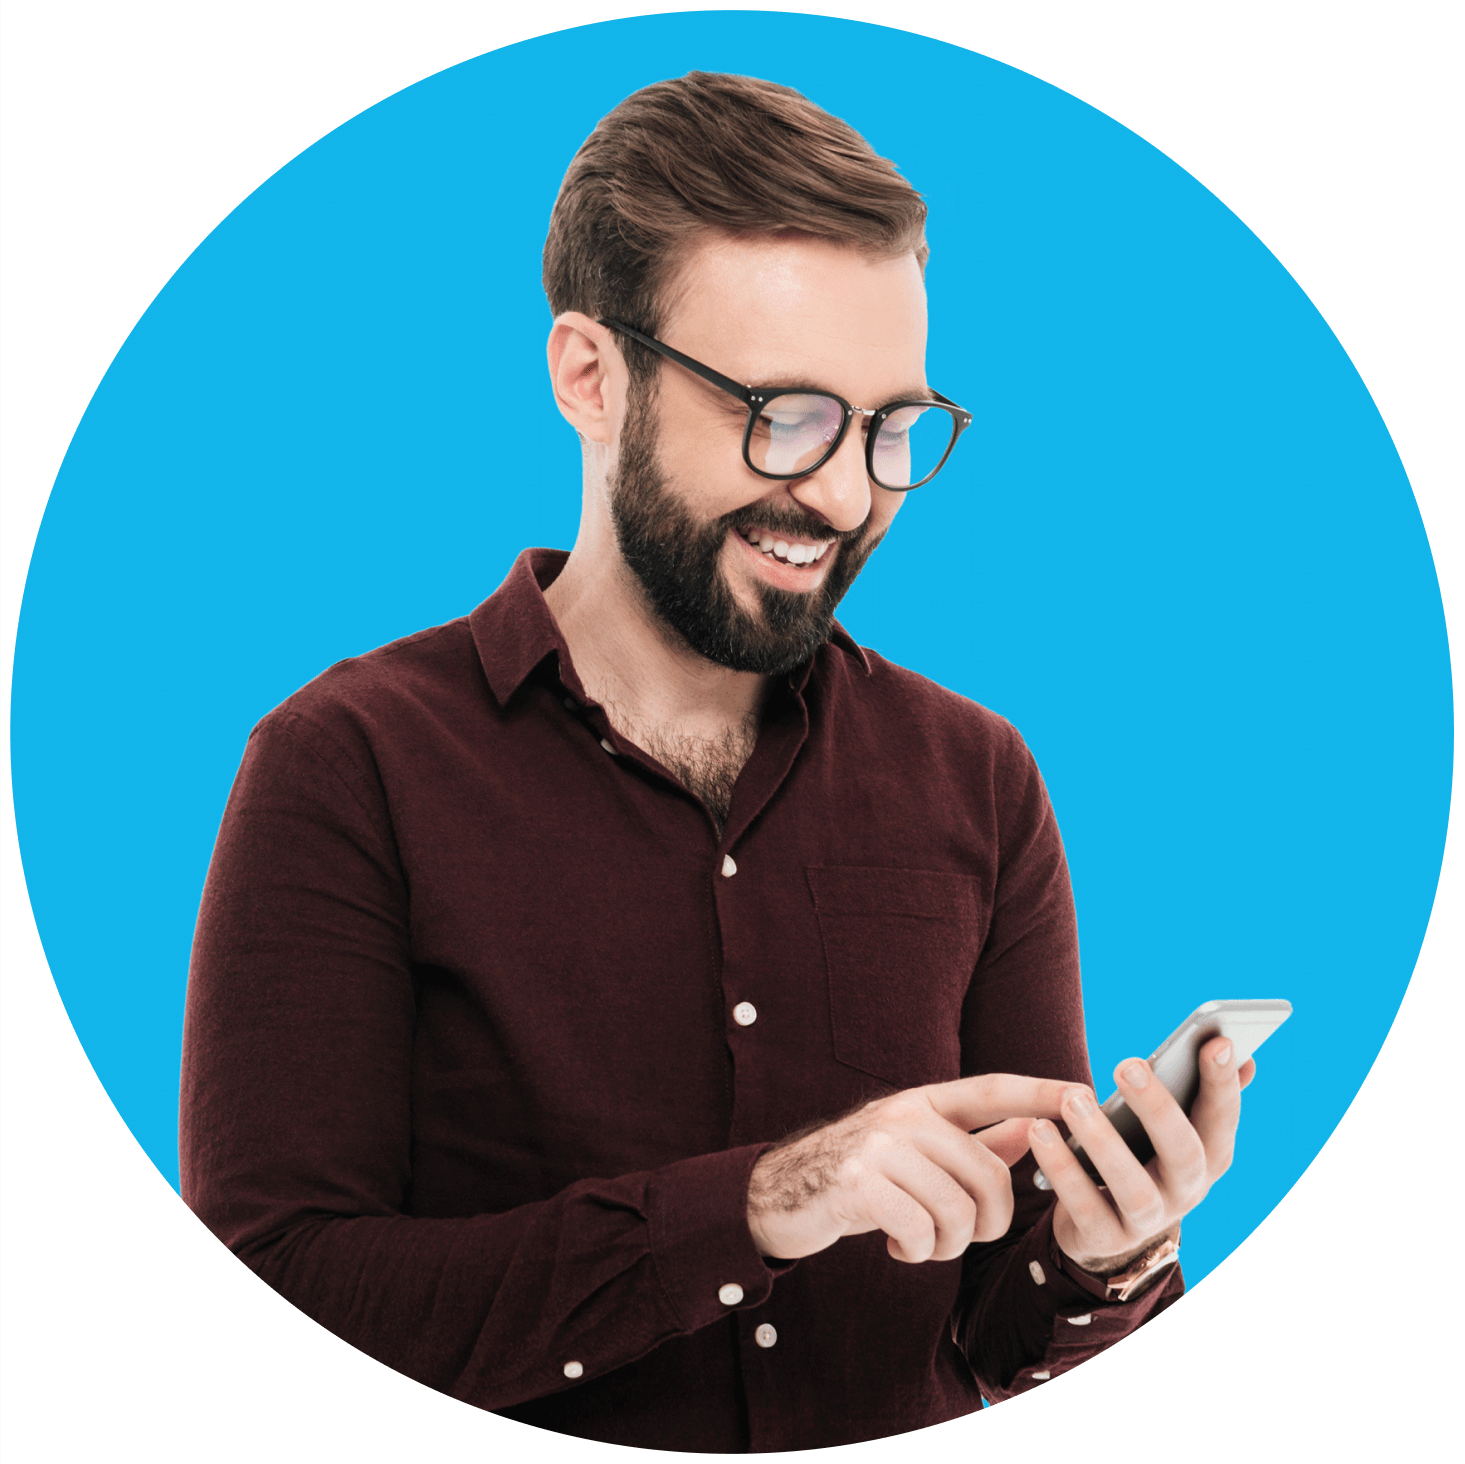 A new Xero client looks happy as they read support articles on their mobile phone.